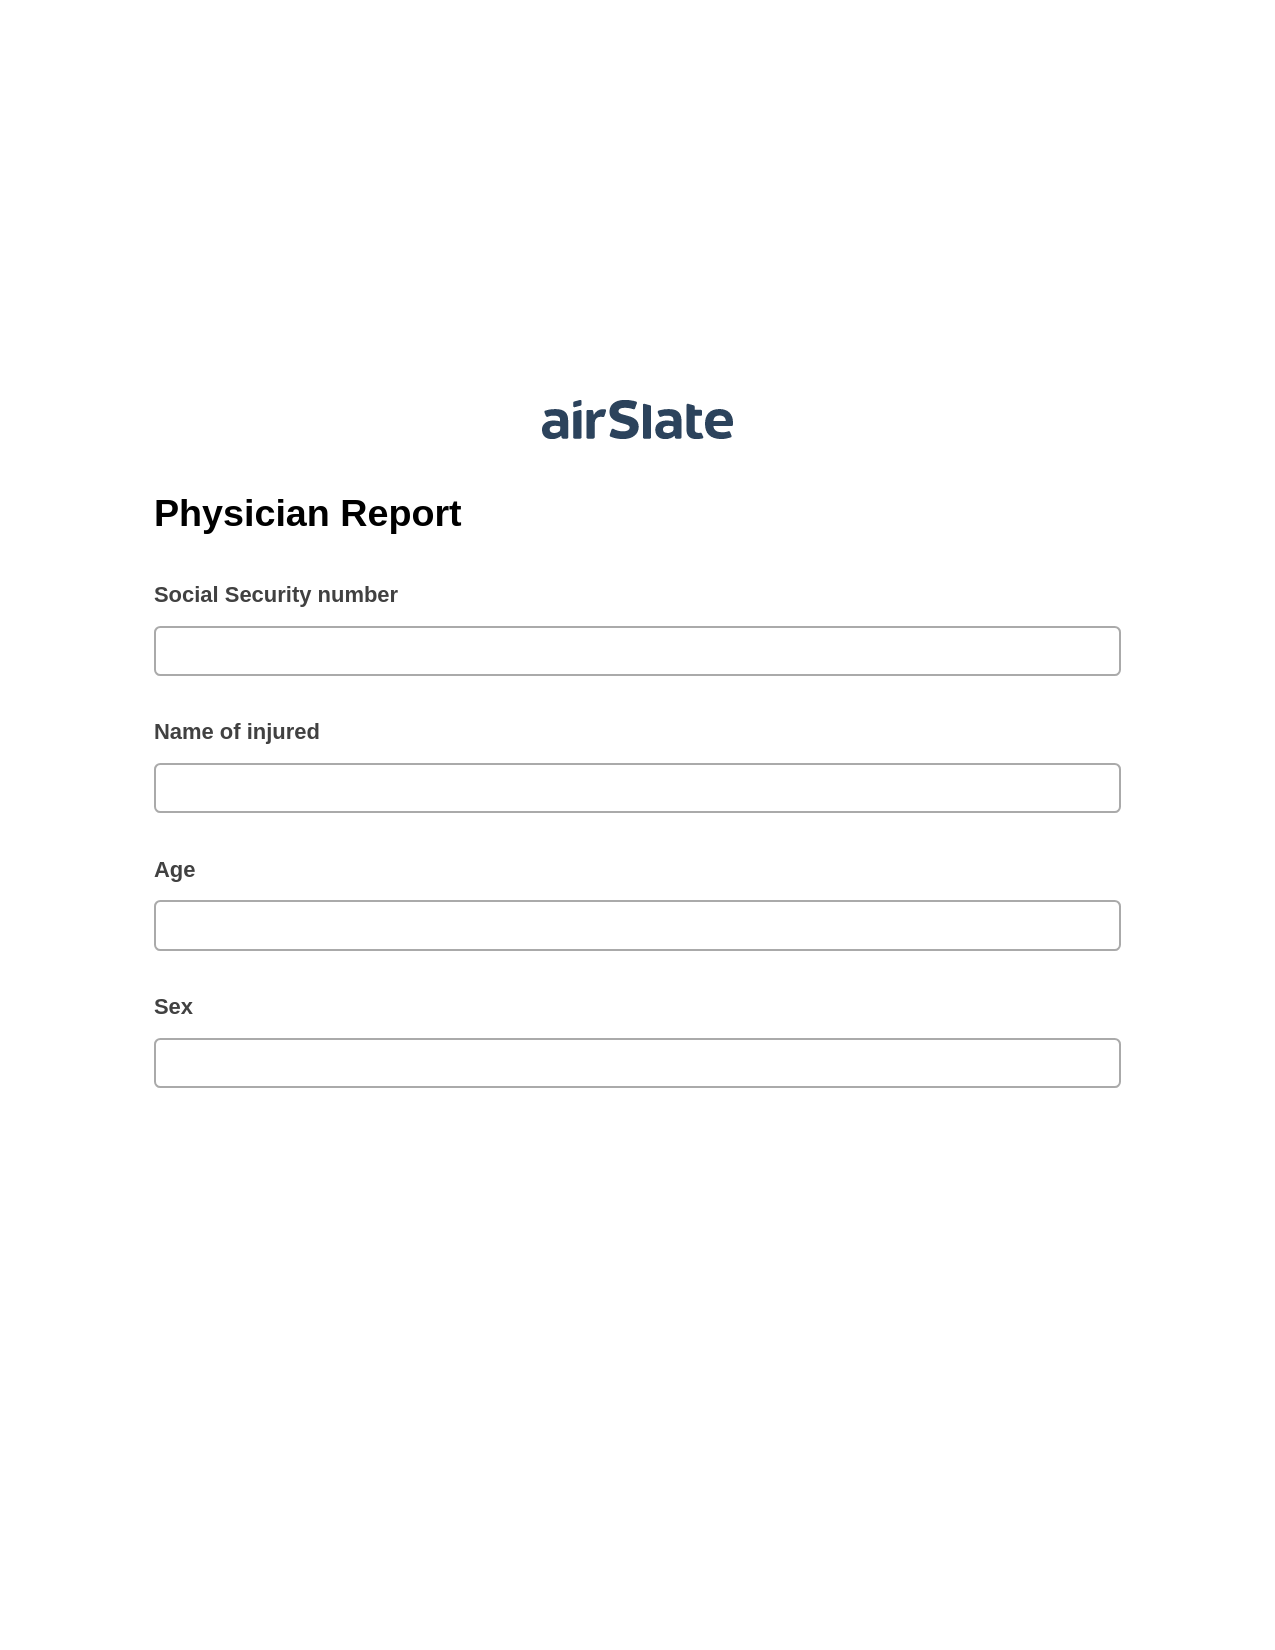 Physician Report Pre-fill Dropdowns from CSV file Bot, Update NetSuite Record Bot, Archive to SharePoint Folder Bot